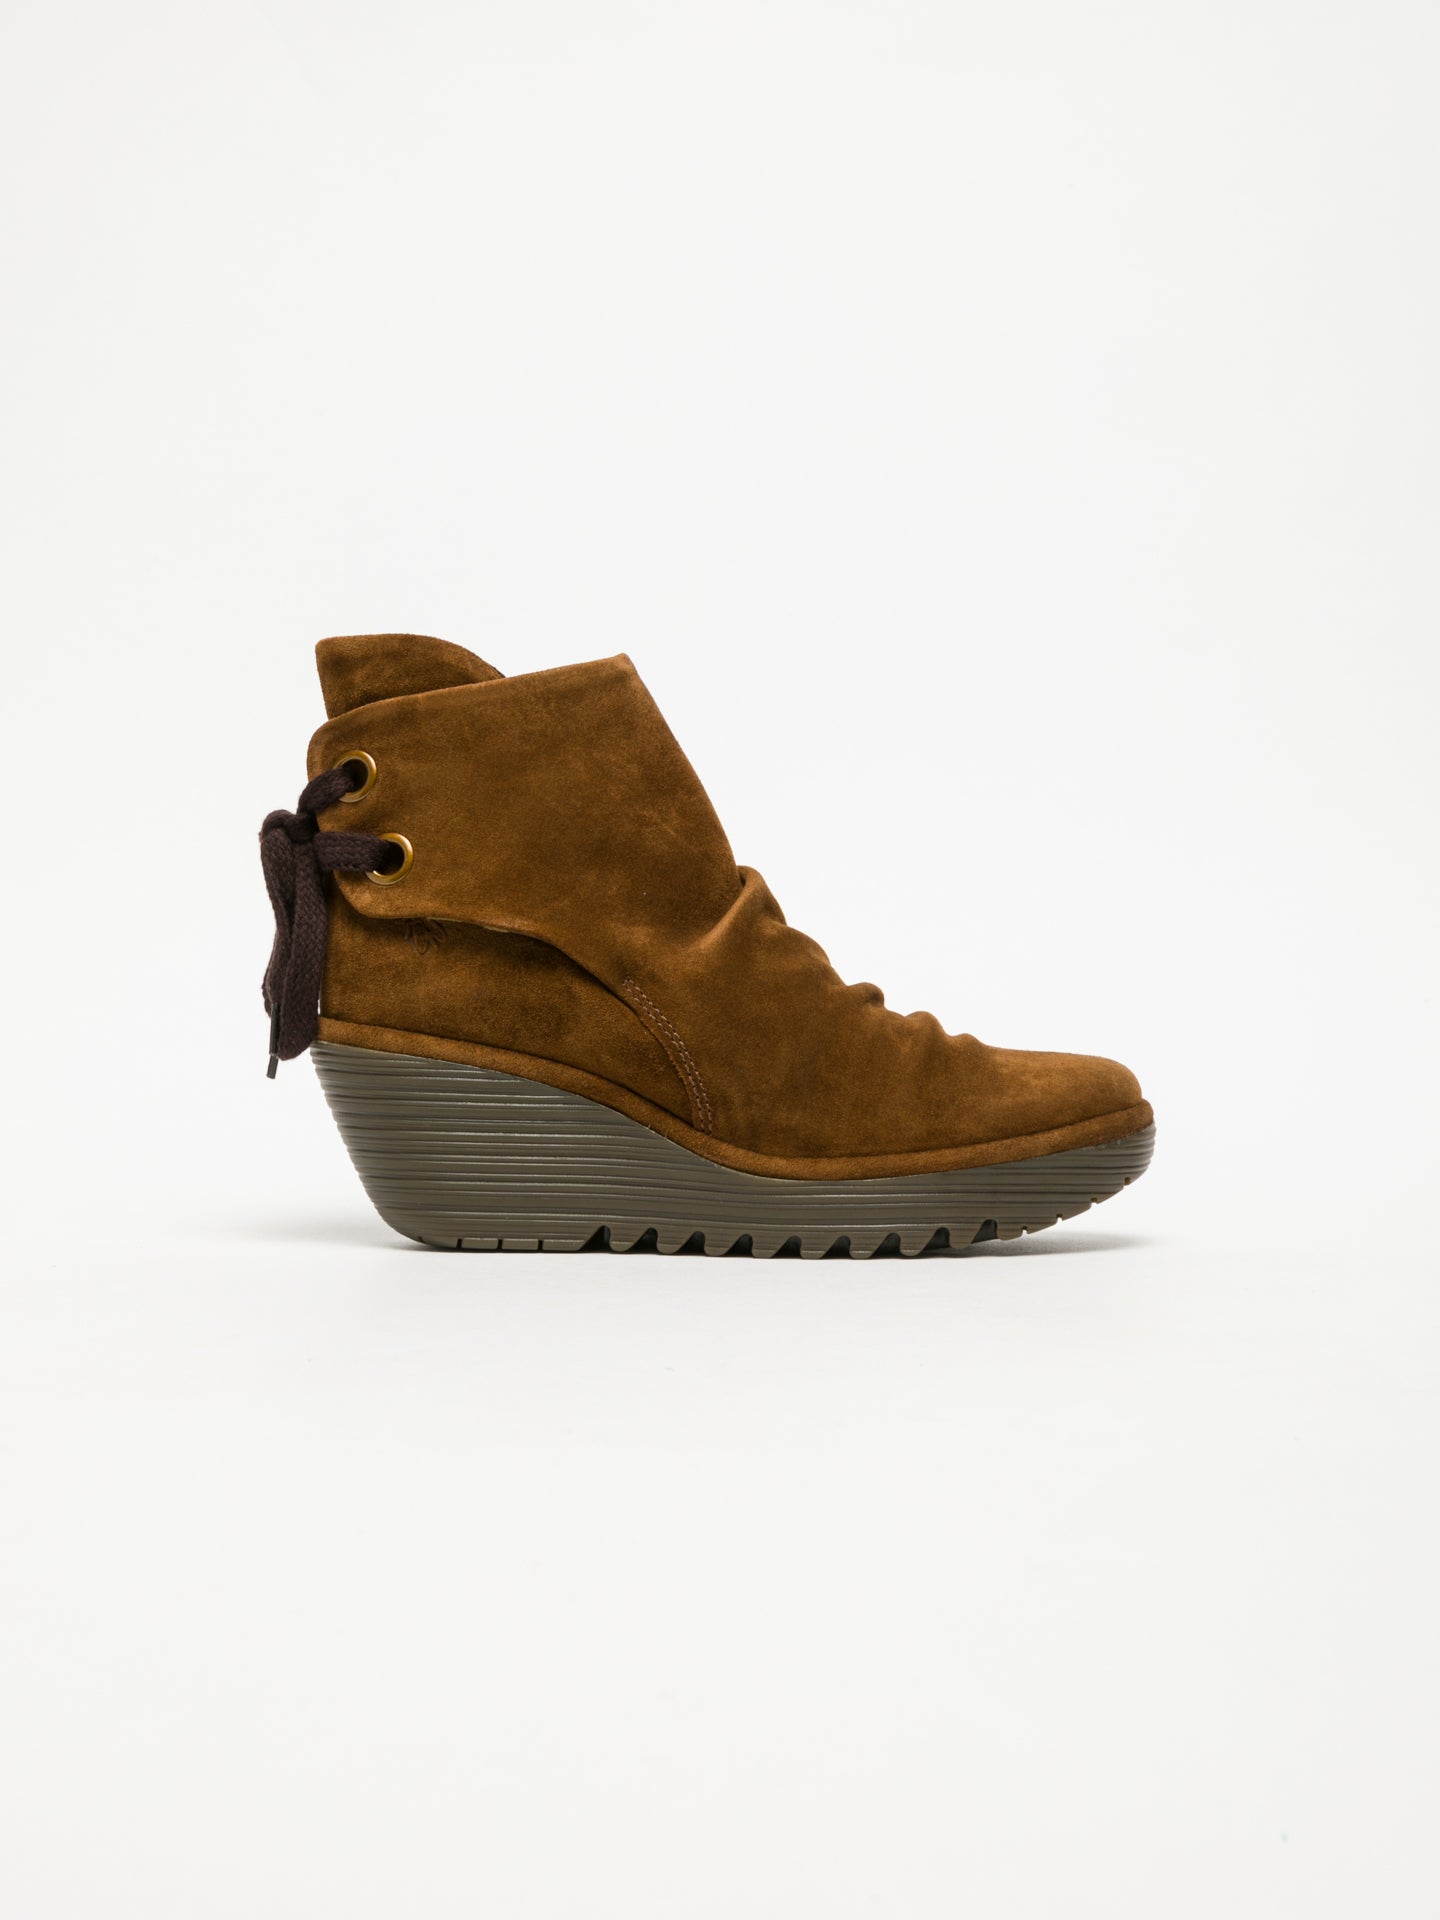 Fly London Chocolate Brown Wedge Ankle Boots